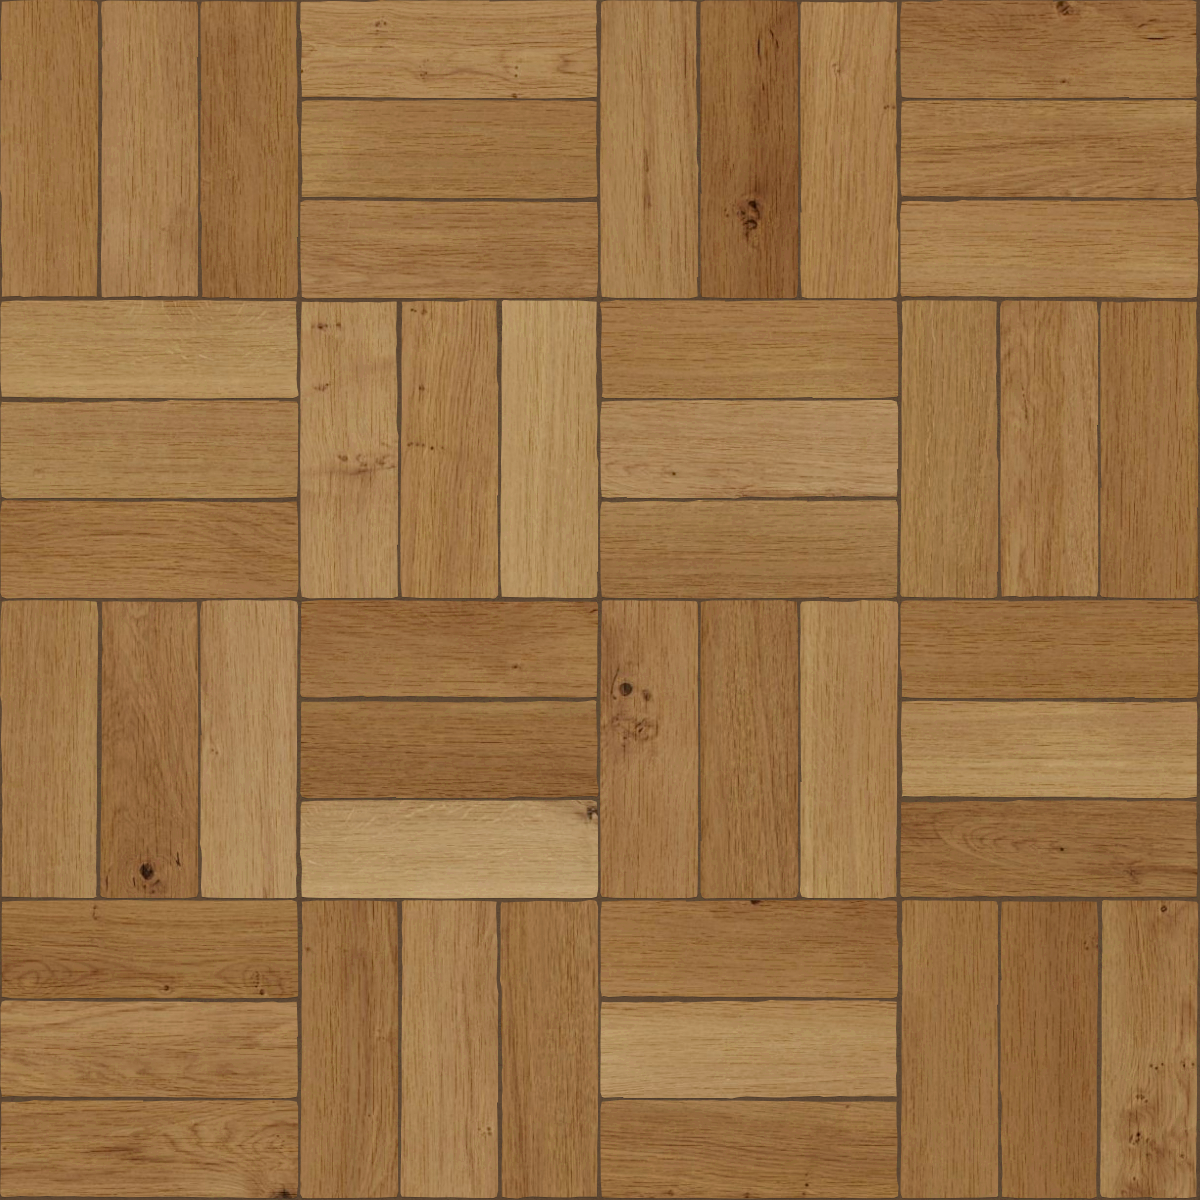 A seamless wood texture with oak boards arranged in a Basketweave pattern